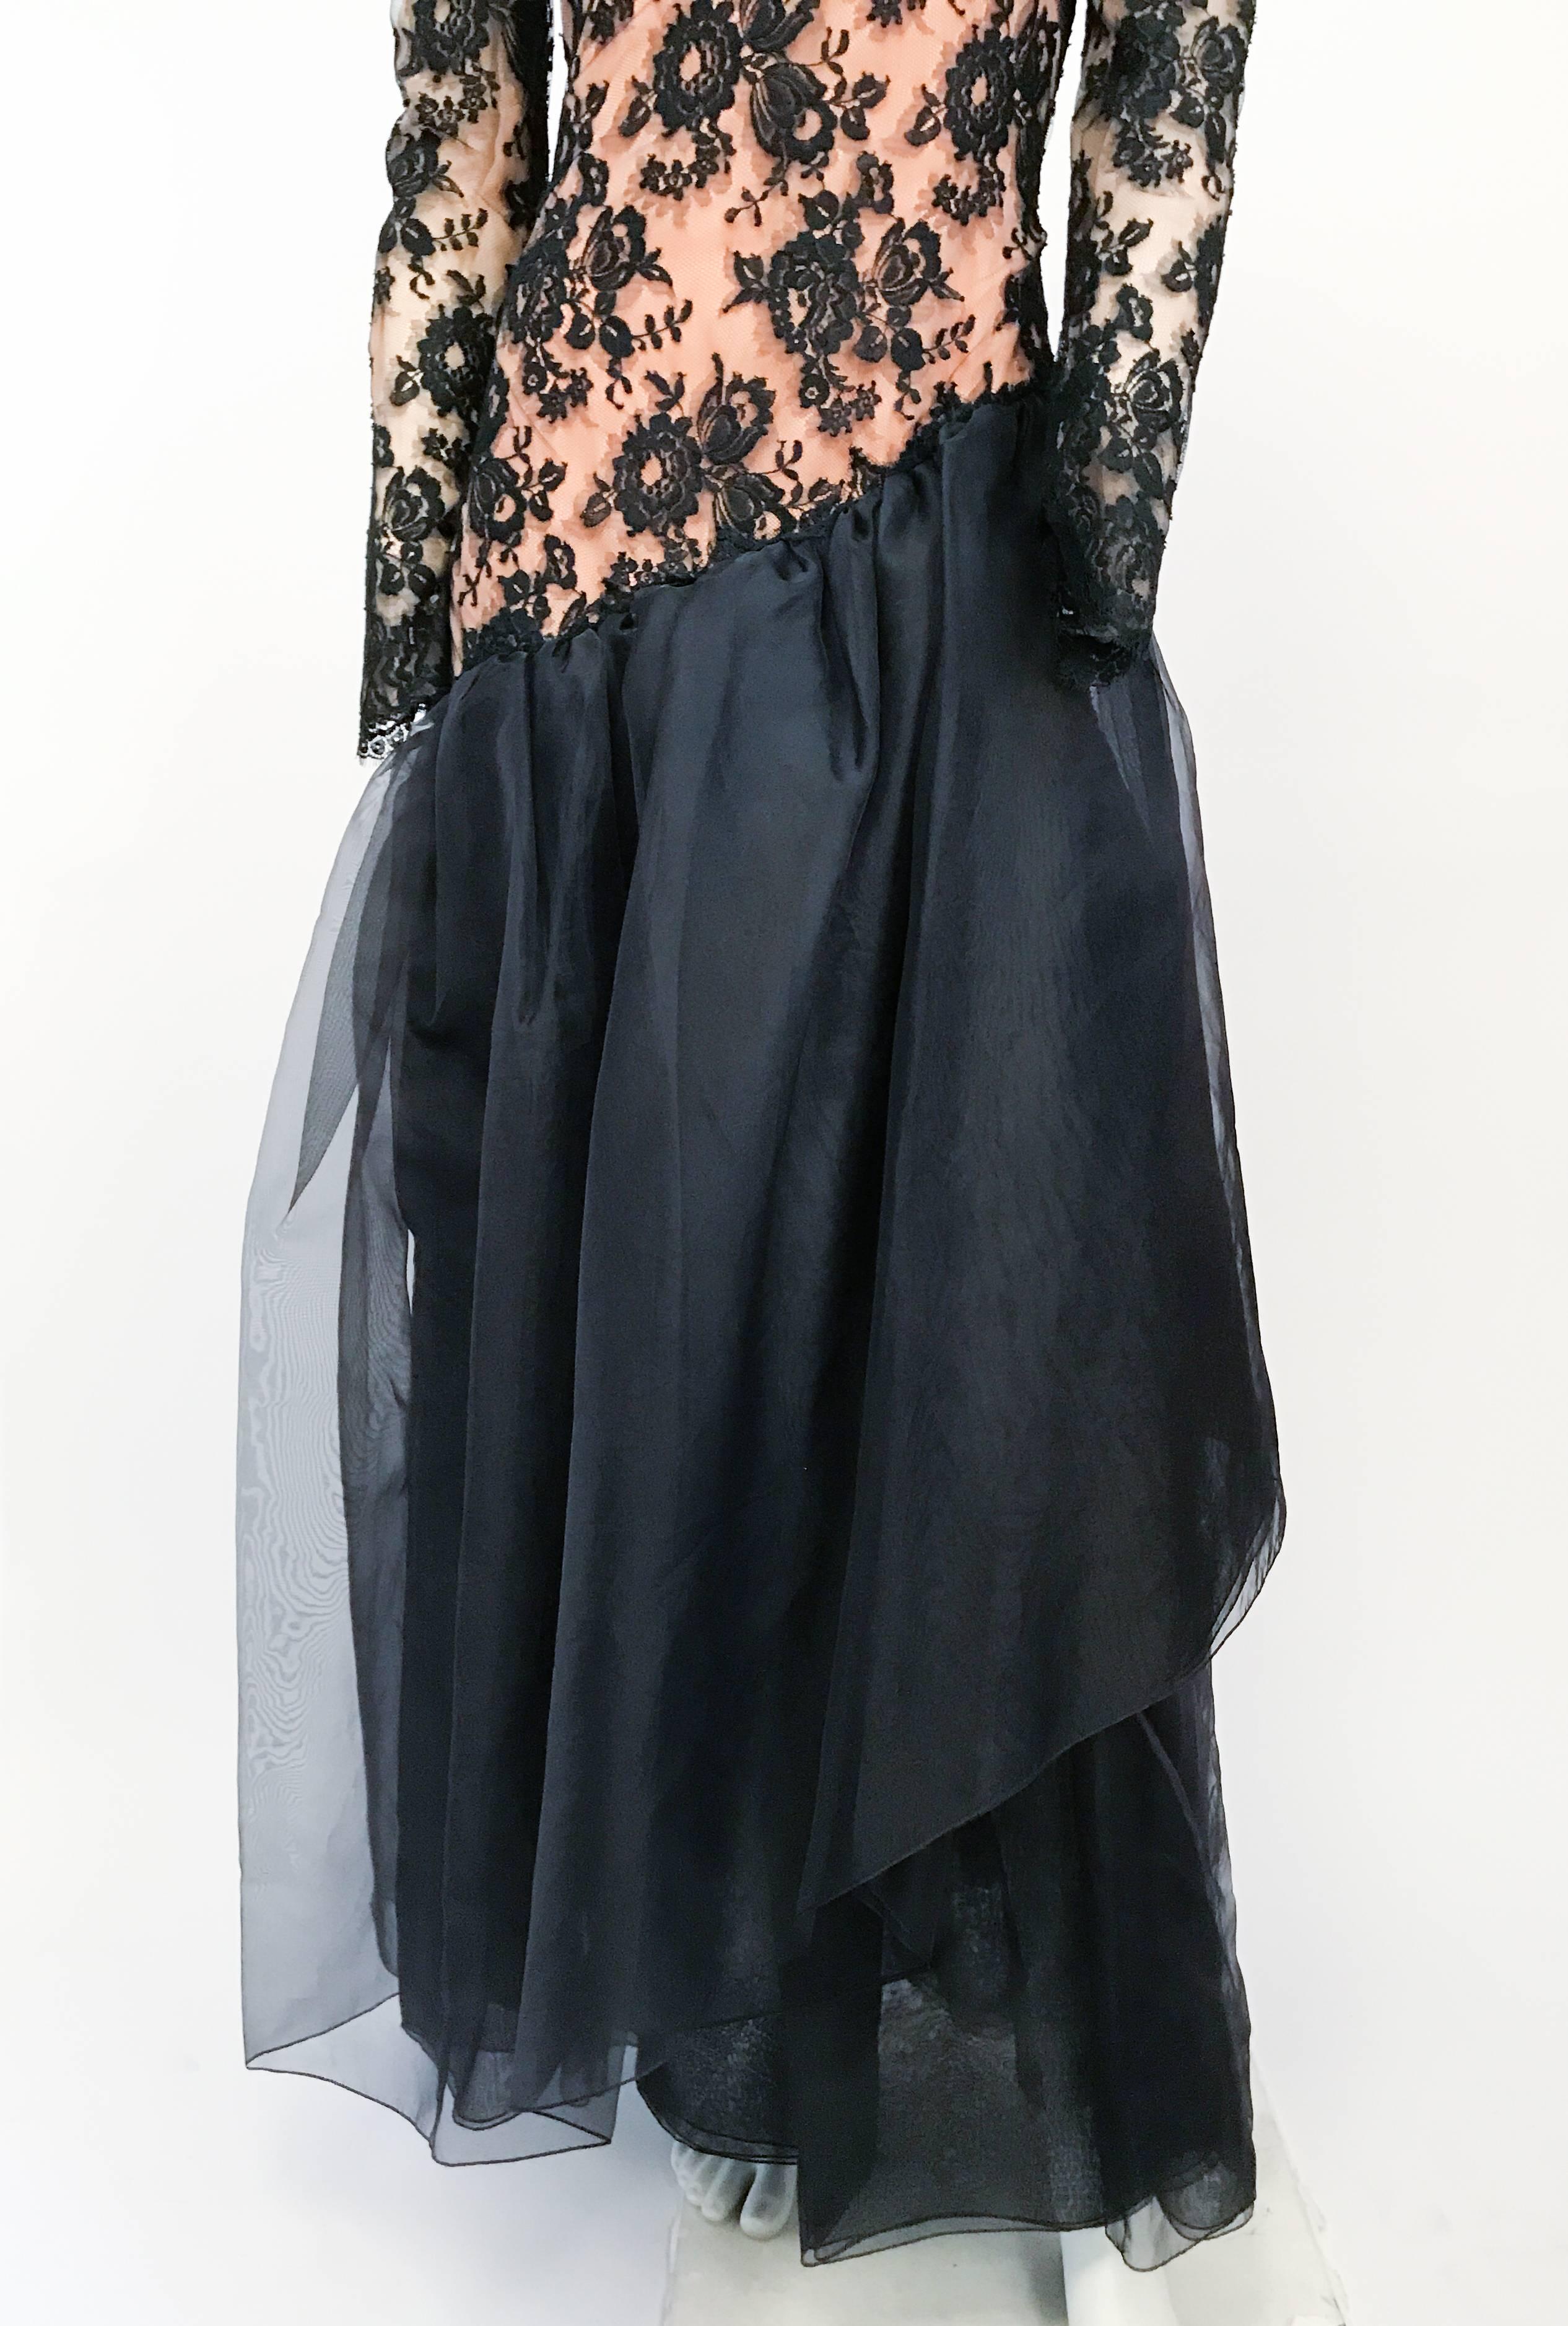 1980s Travilla Black Floral Lace Dress In Good Condition In San Francisco, CA